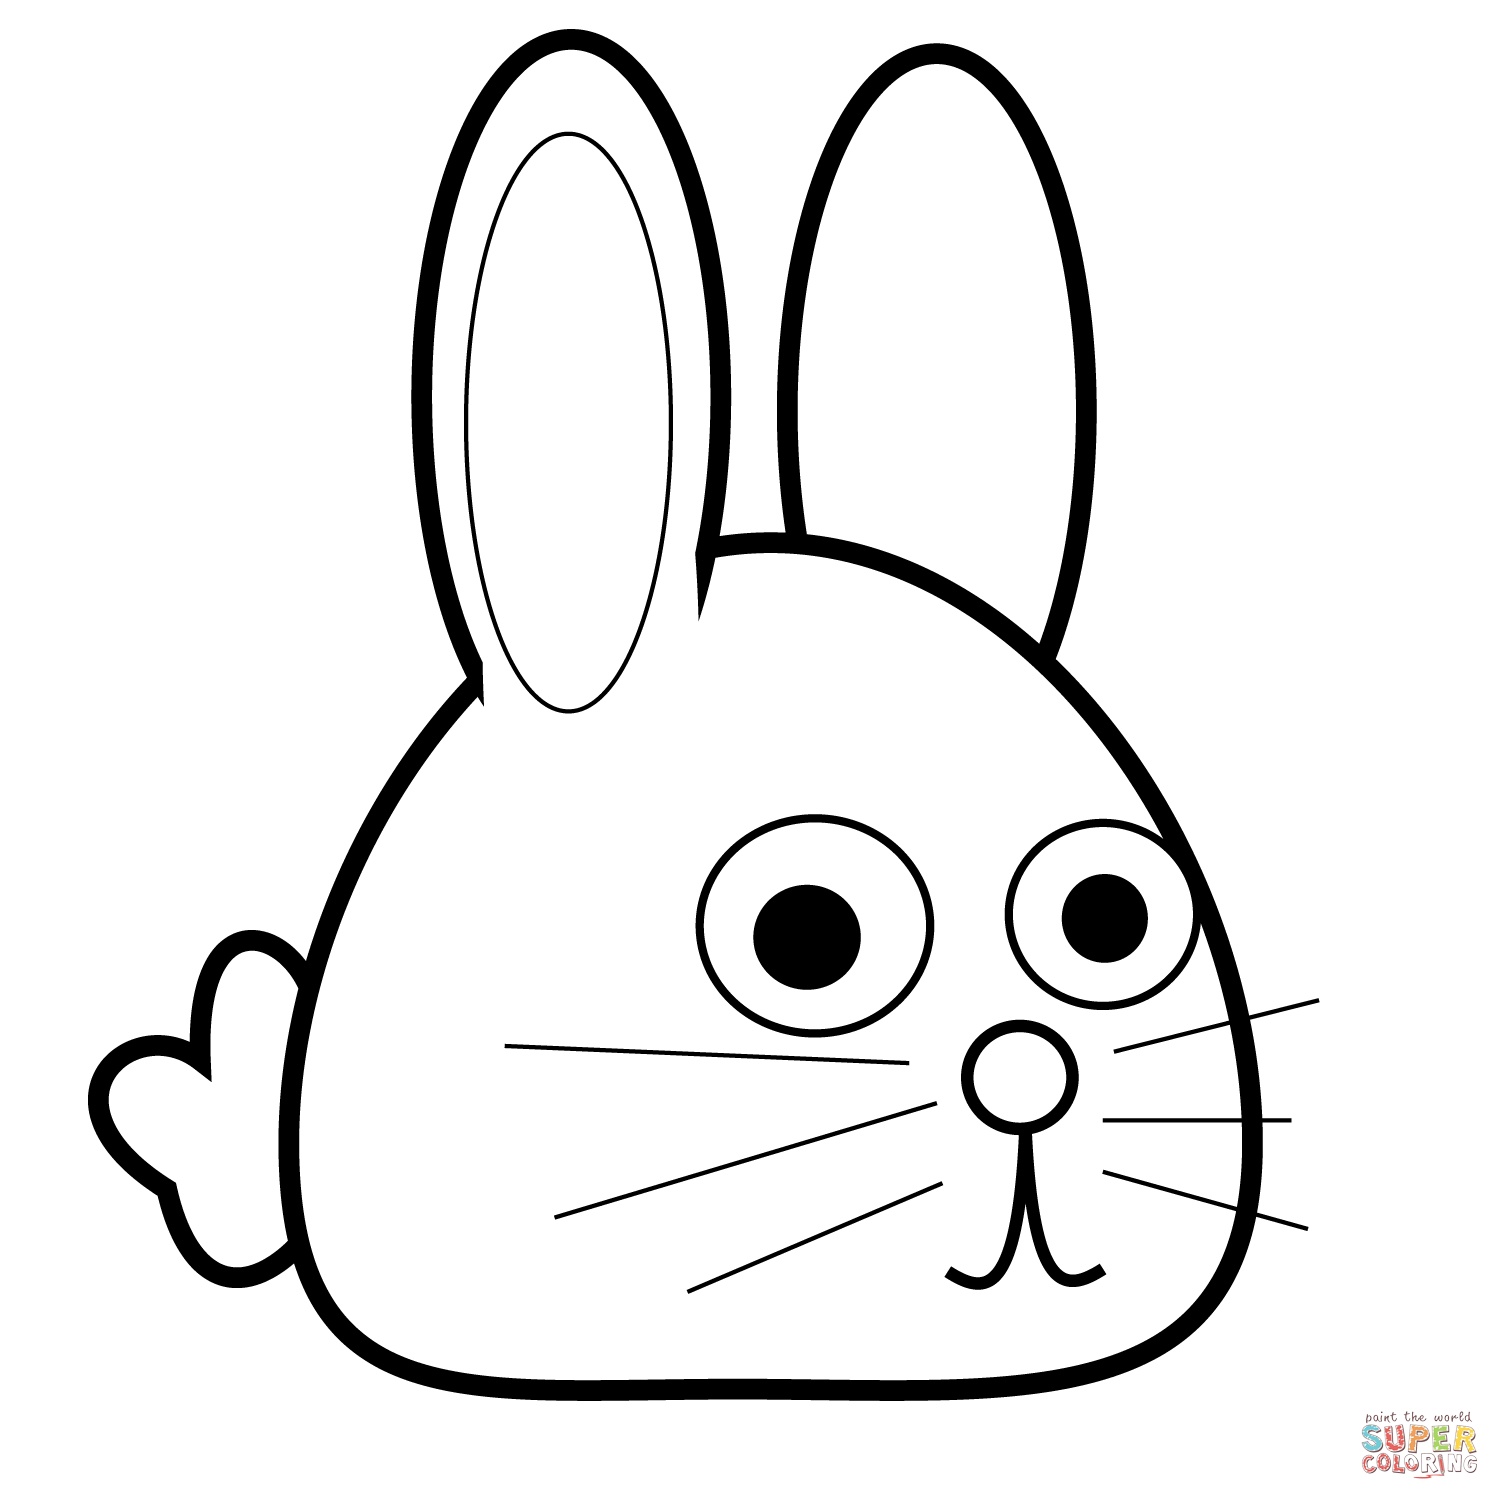 Cute Bunny Coloring Pages at GetColorings.com | Free printable ...